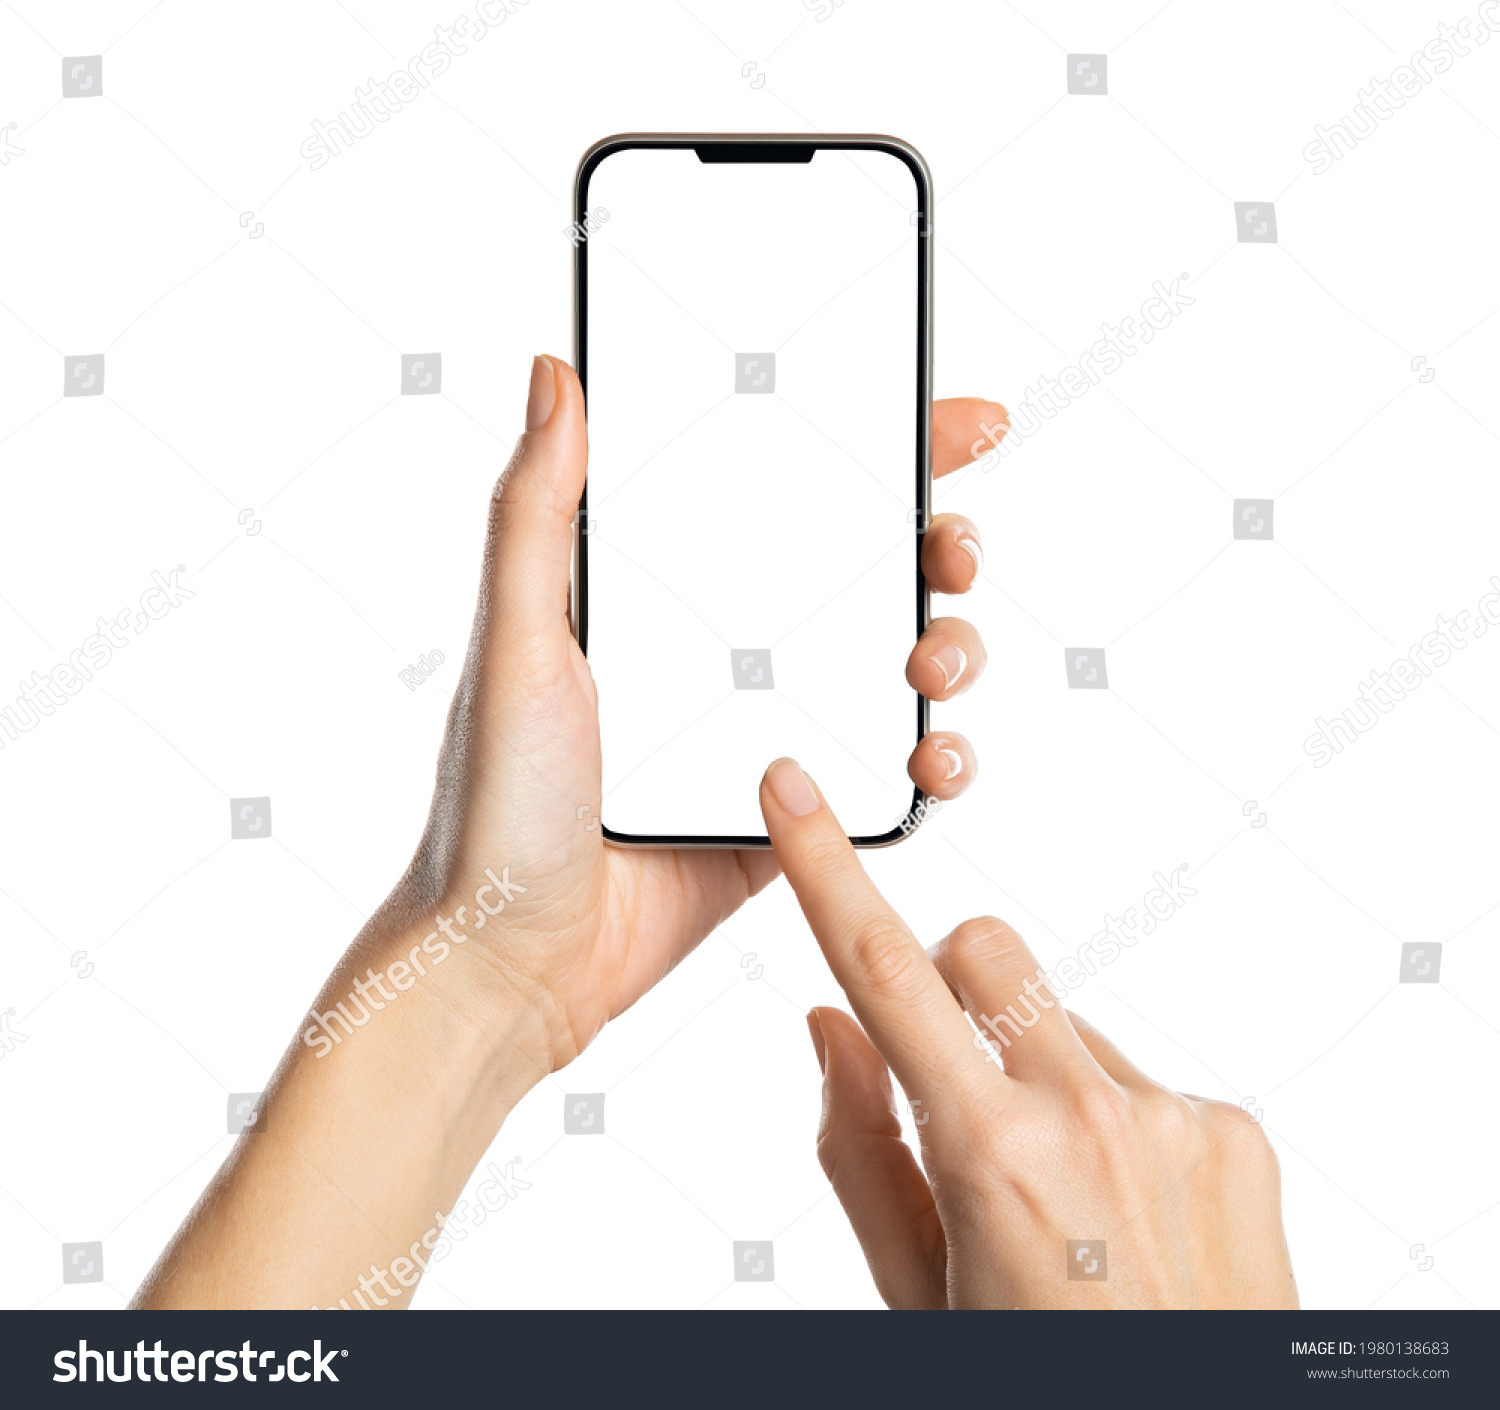 Female hands holding modern cellphone. Close up of woman hands holding smart phone with blank screen. Empty smartphone white screen ready for your app to be placed isolated on white background.  #1980138683